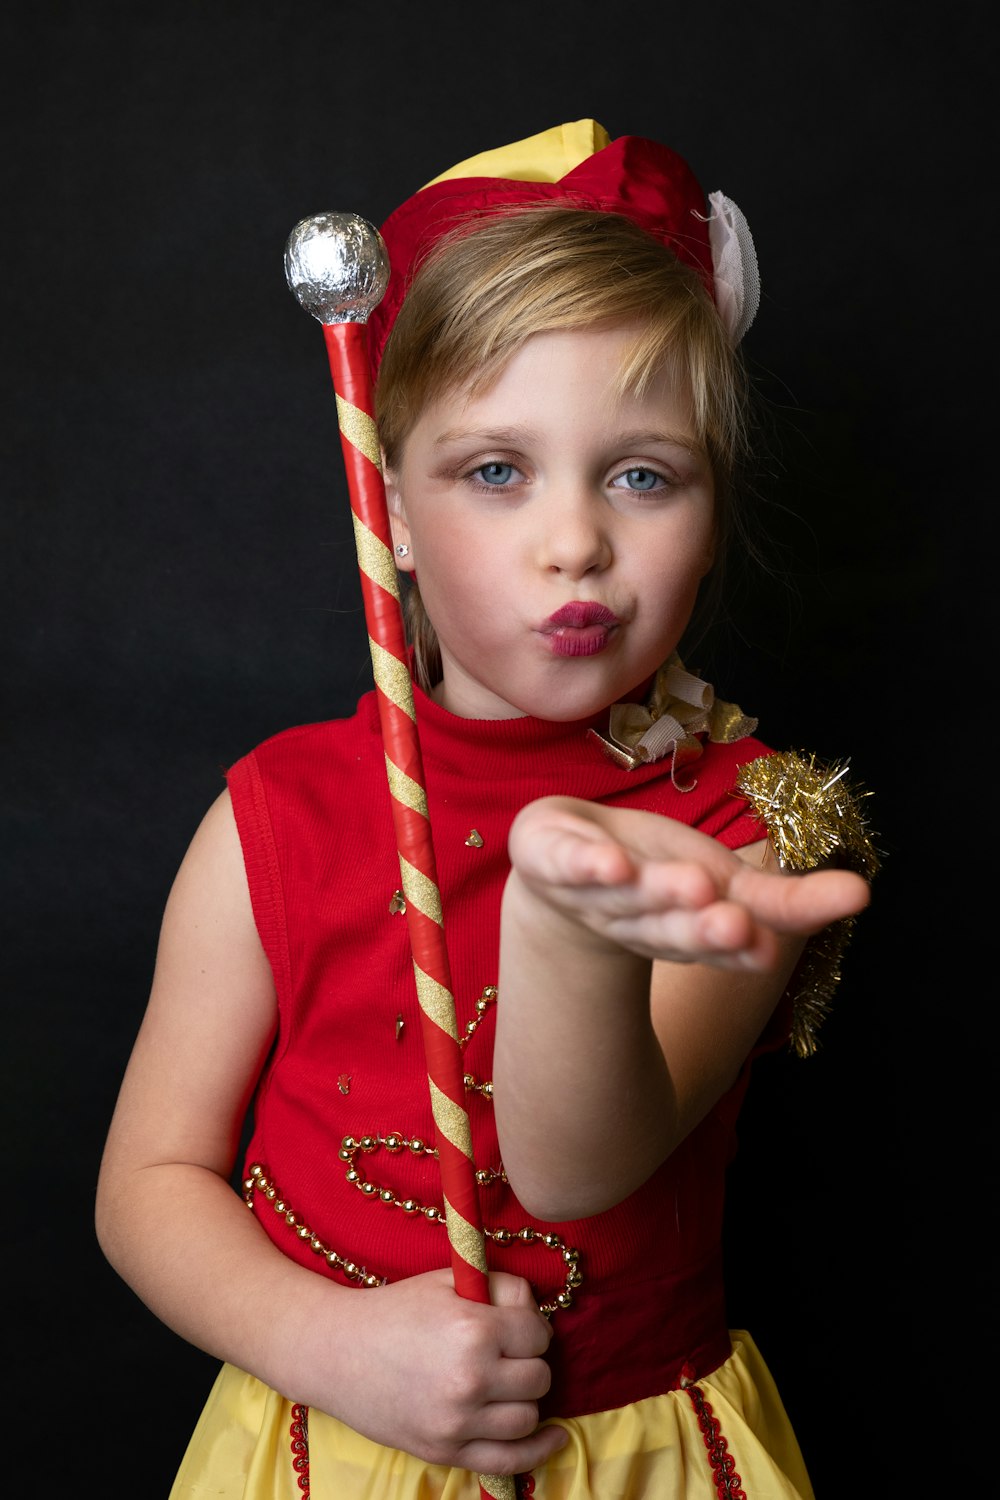 a little girl dressed in a costume holding a candy cane